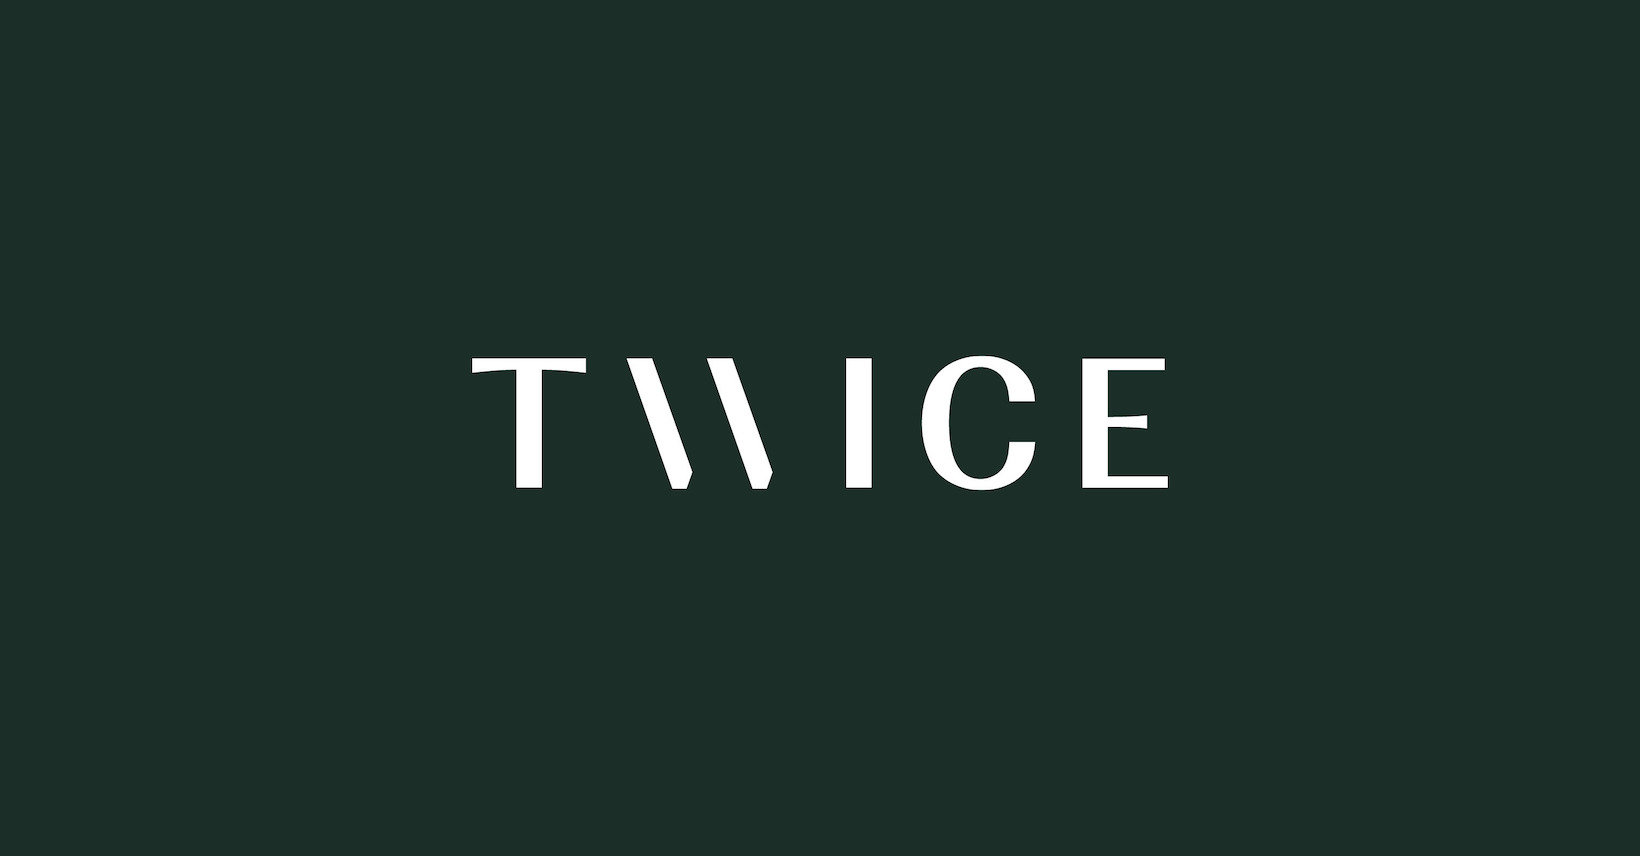 Twice Projects  Photos, videos, logos, illustrations and branding